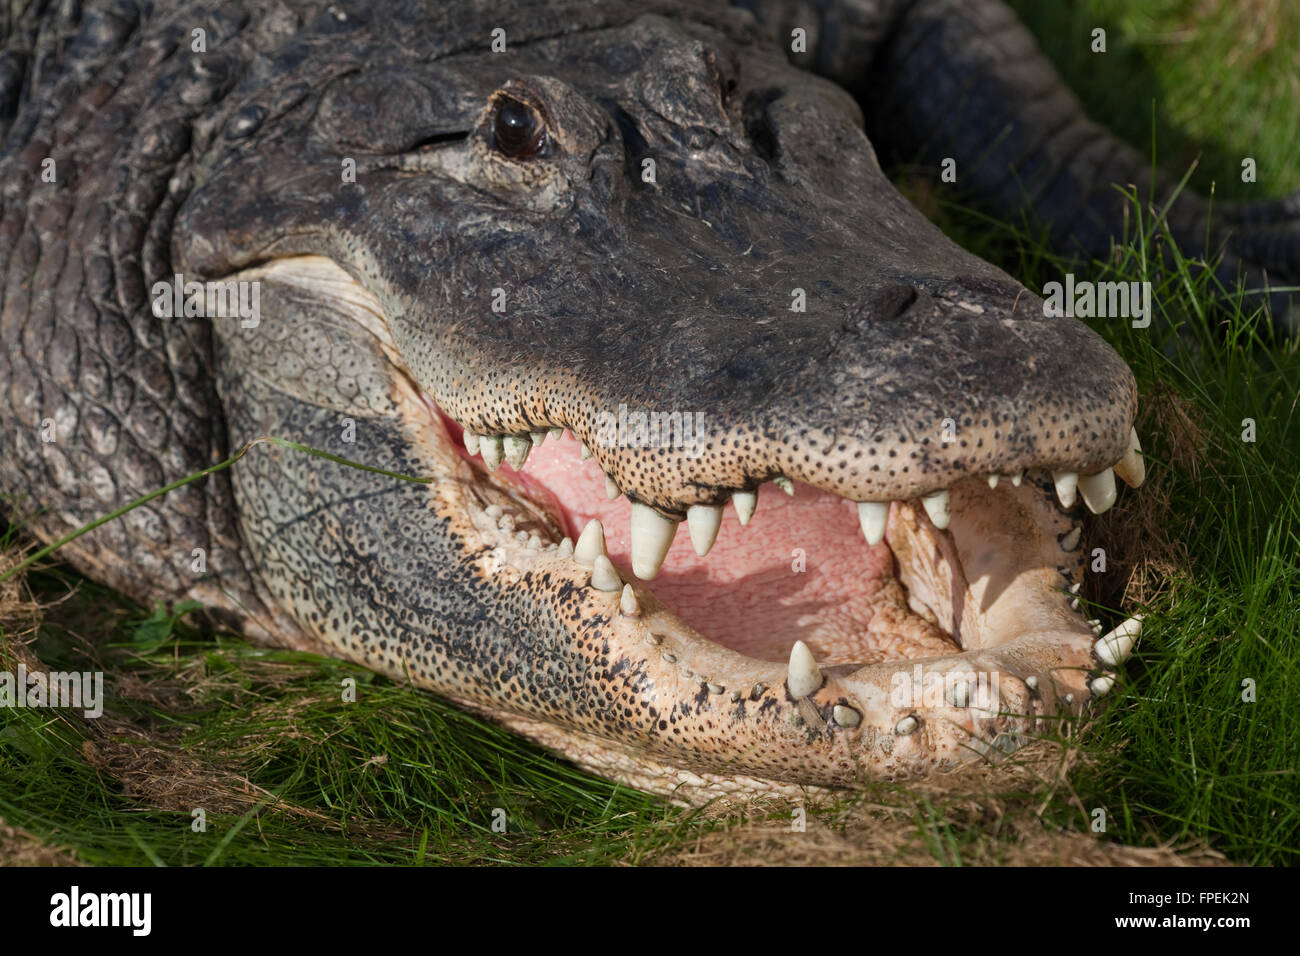 American Alligator (Alligator mississippiensis). Head, jaws, teeth. Basking on land Mouth open to cool internal body temperature Stock Photo